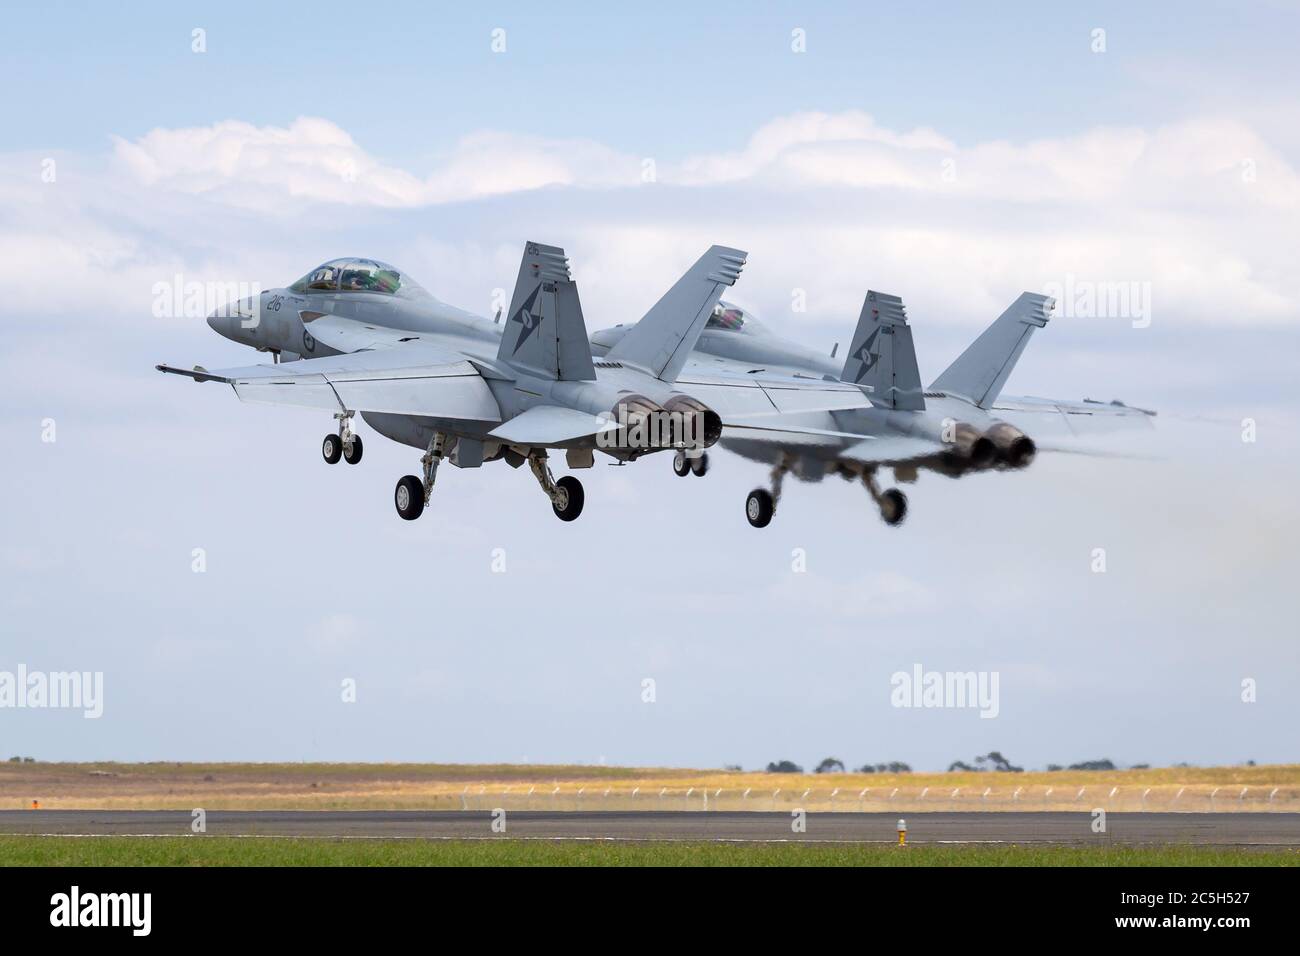 Two Royal Australian Air Force (RAAF) Boeing F/A-18F Super Hornet multirole fighter aircraft taking off in formation. Stock Photo